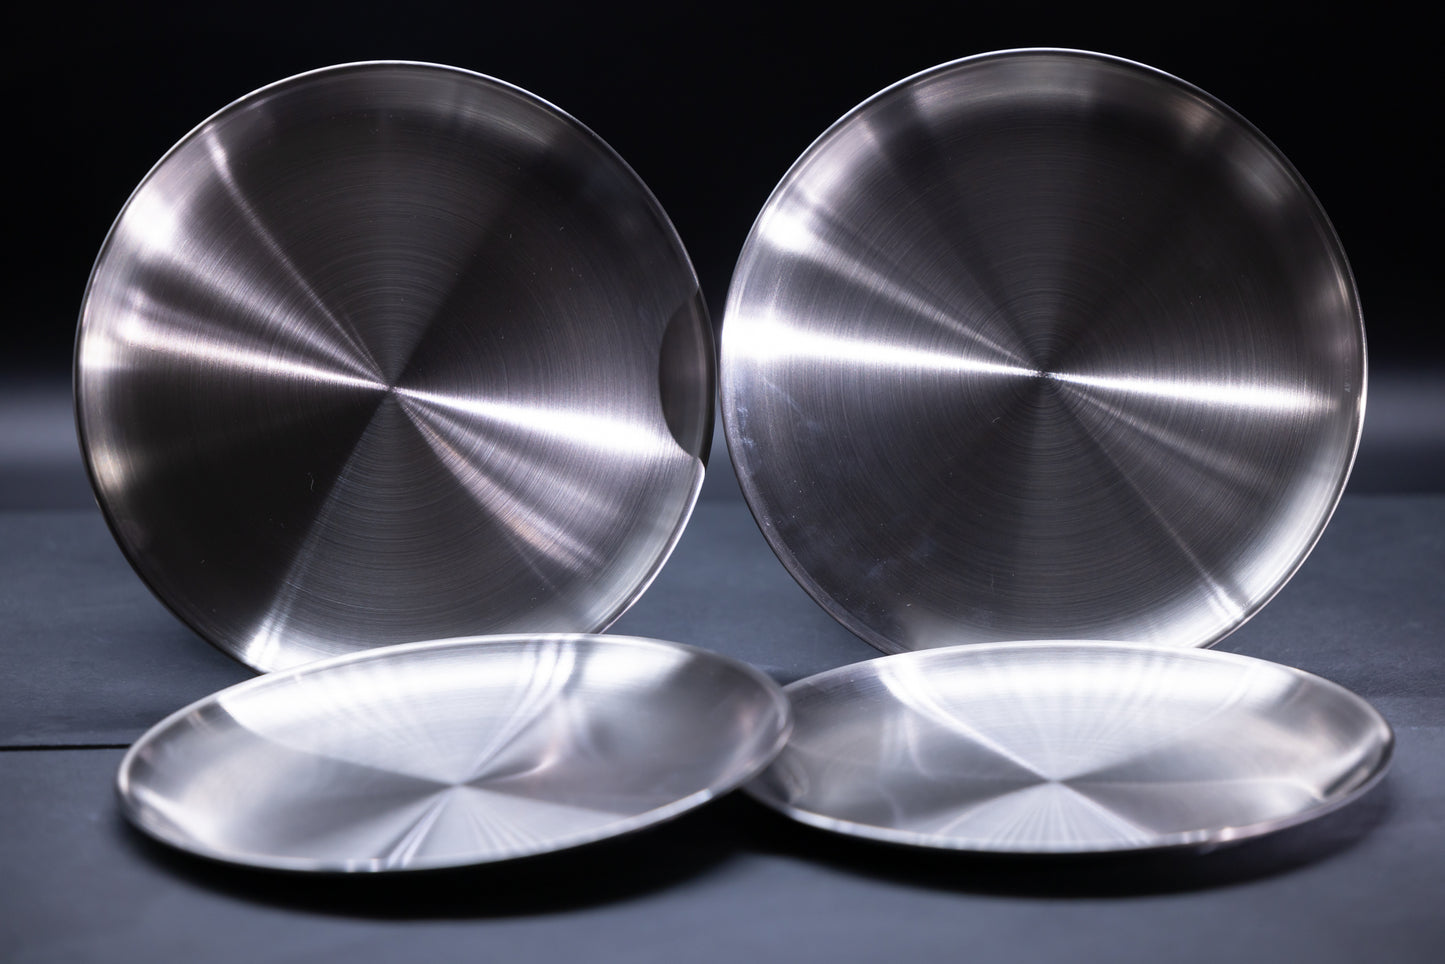 Stainless Steel Plates Set (x4)